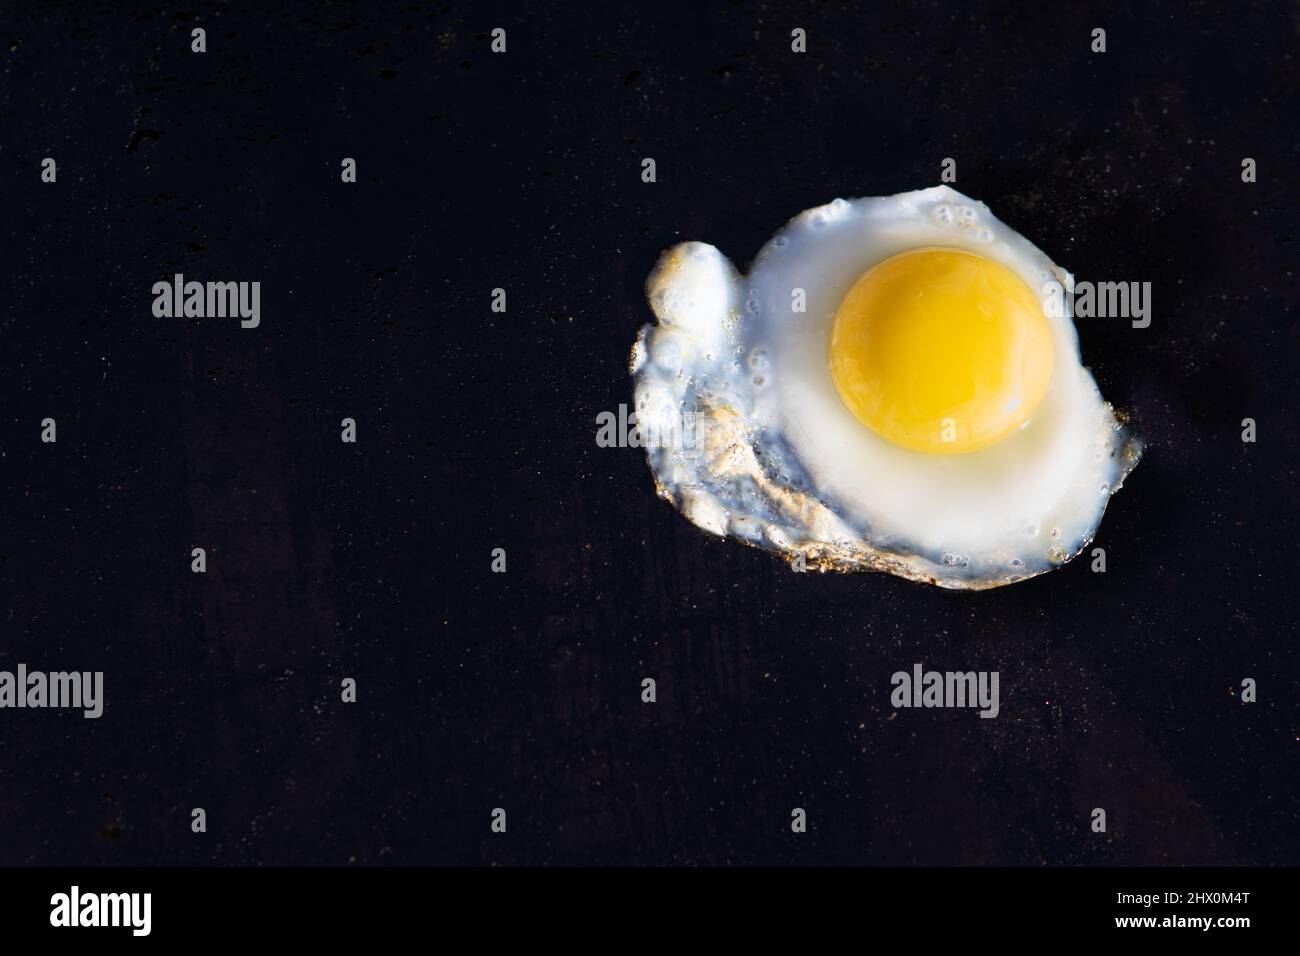 Single fried quail egg. Fried on a flat top griddle. Bright yellow yolk on a greasy black flat top. Stock Photo